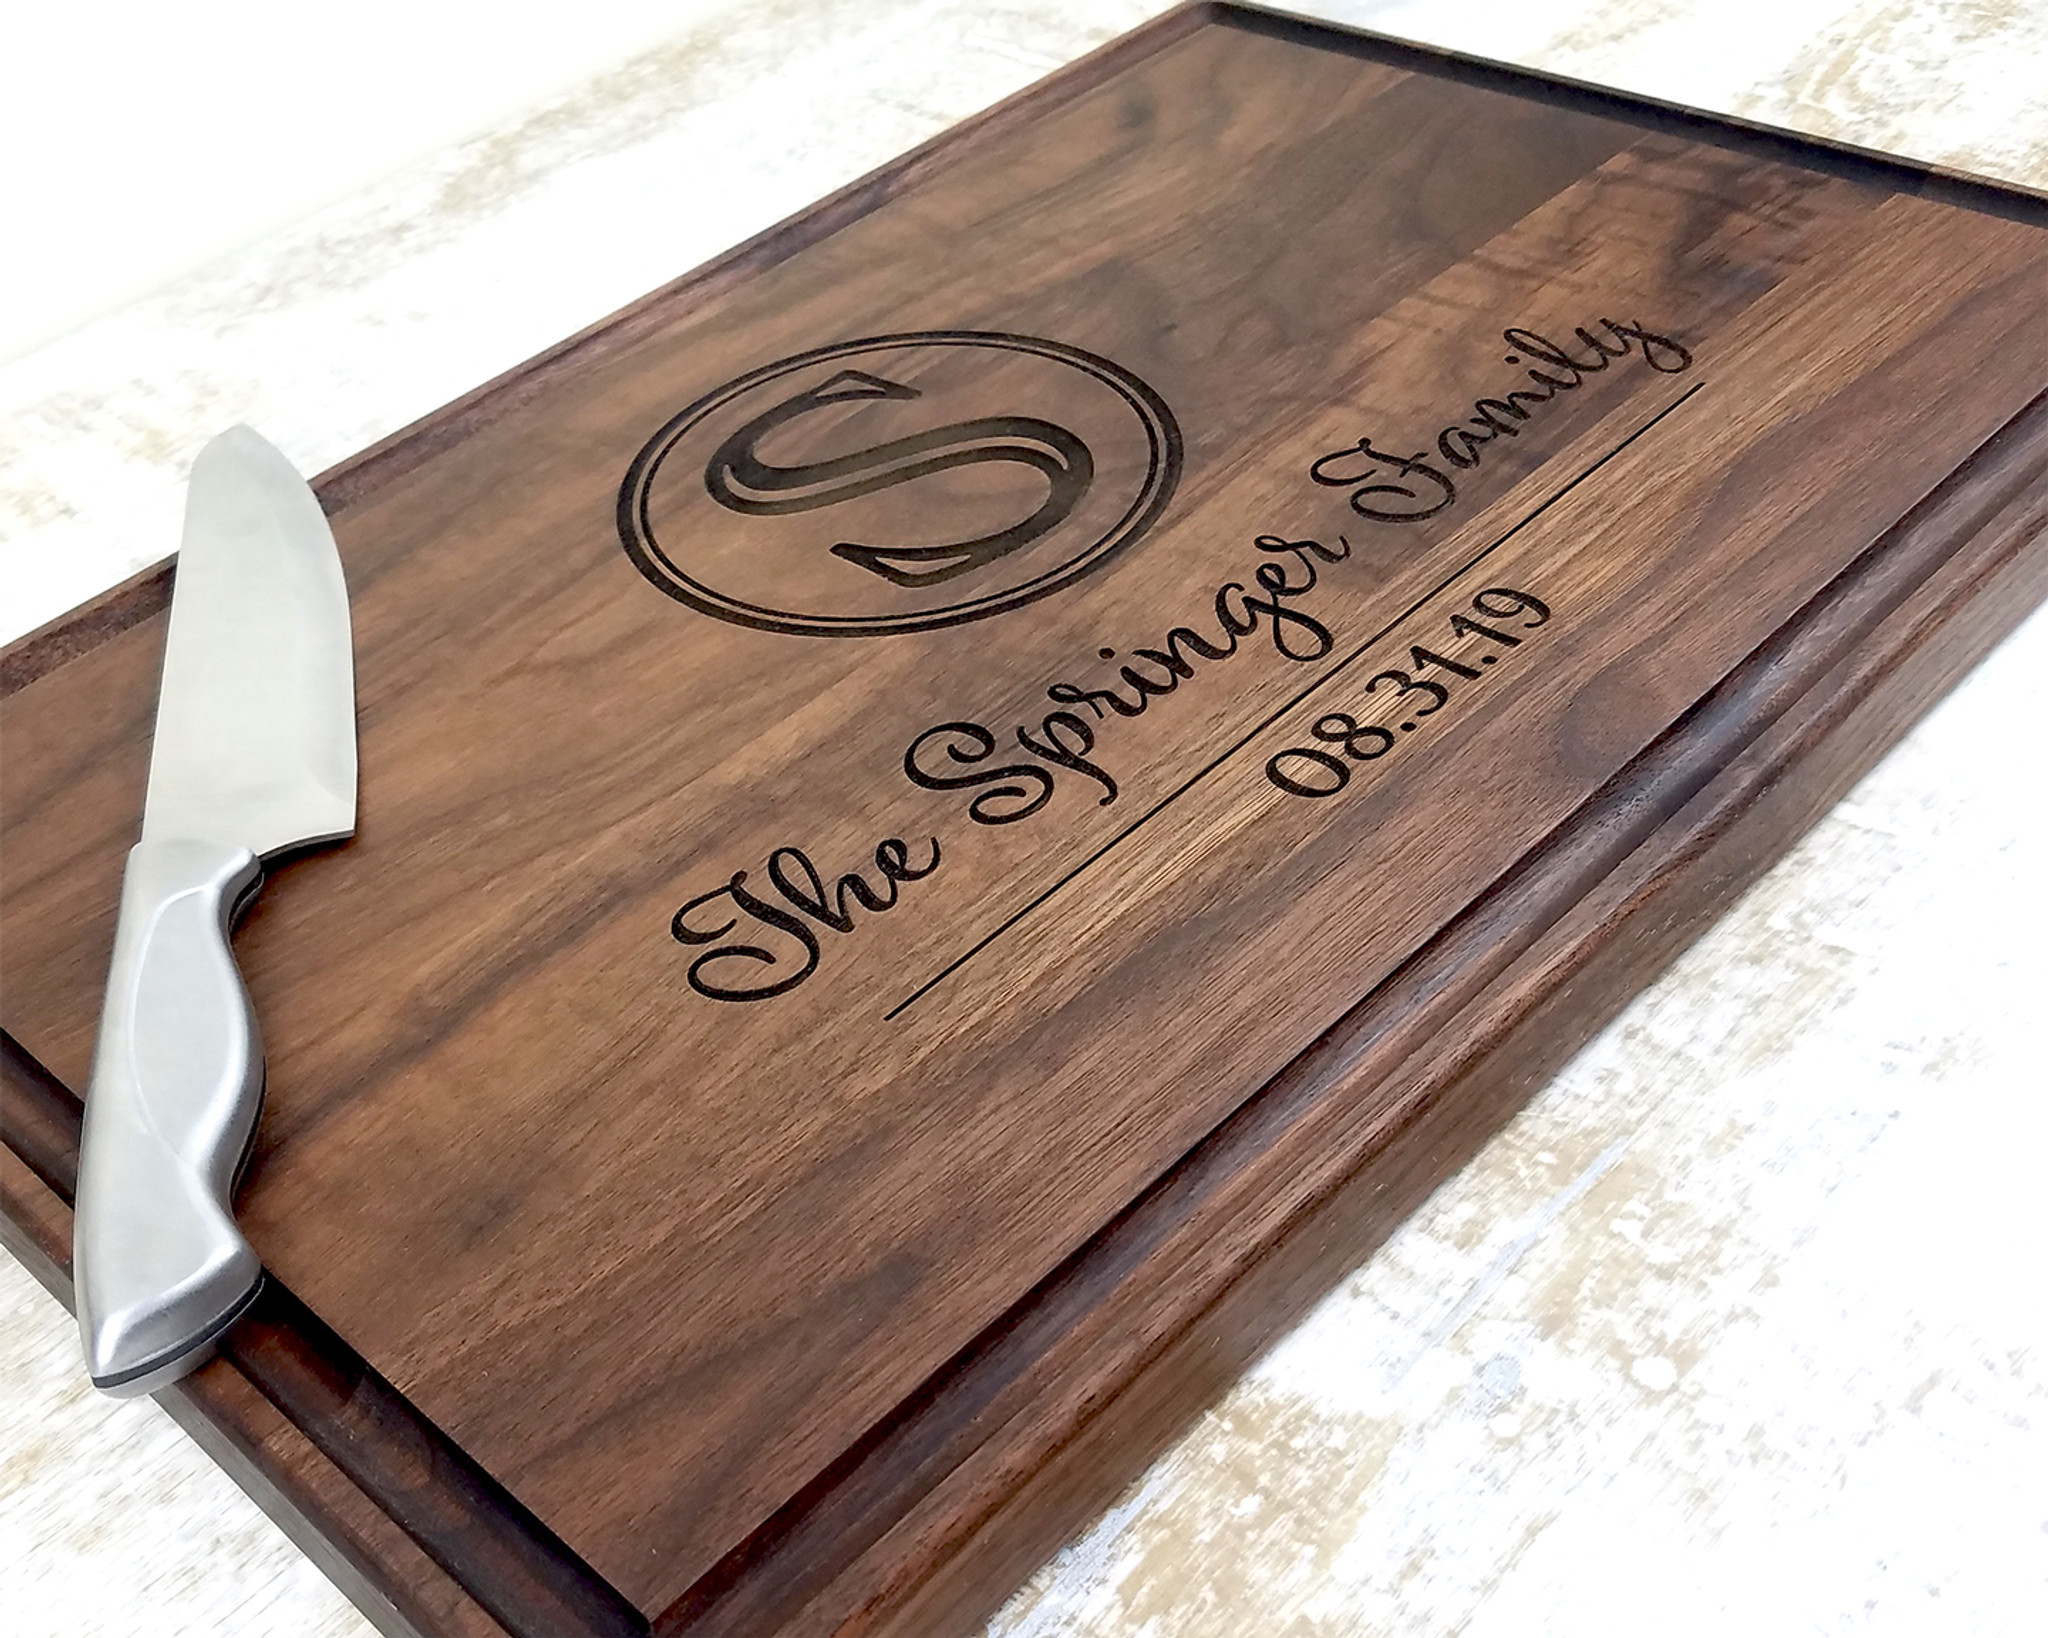 https://cdn11.bigcommerce.com/s-26585/images/stencil/2048x2048/products/317/1628/personalized_wood_cutting_board__80790.1583537194.jpg?c=2